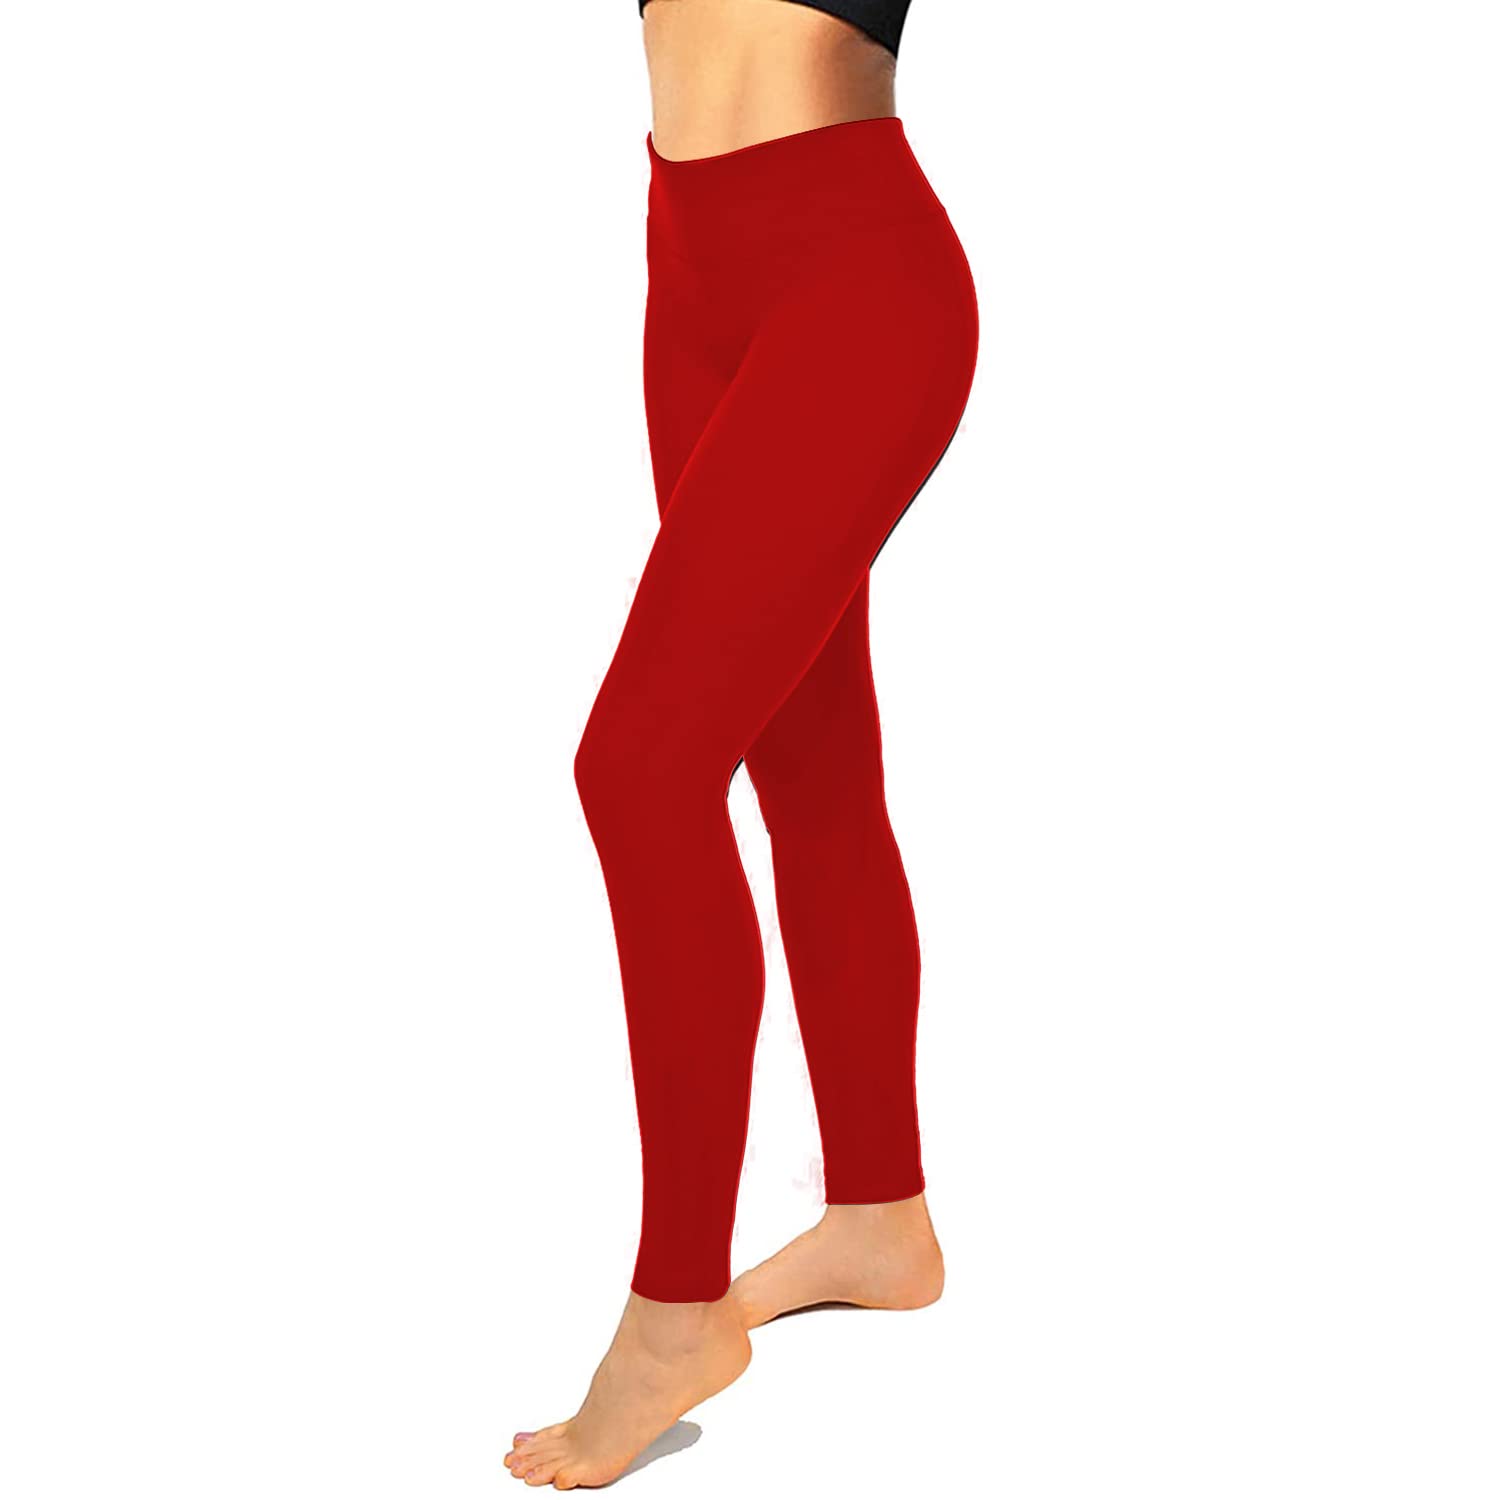 Hfyihgf High Waisted Leggings for Women Soft Comfy Tummy Control Slimming Yoga  Pants for Workout Running(Red,M) 